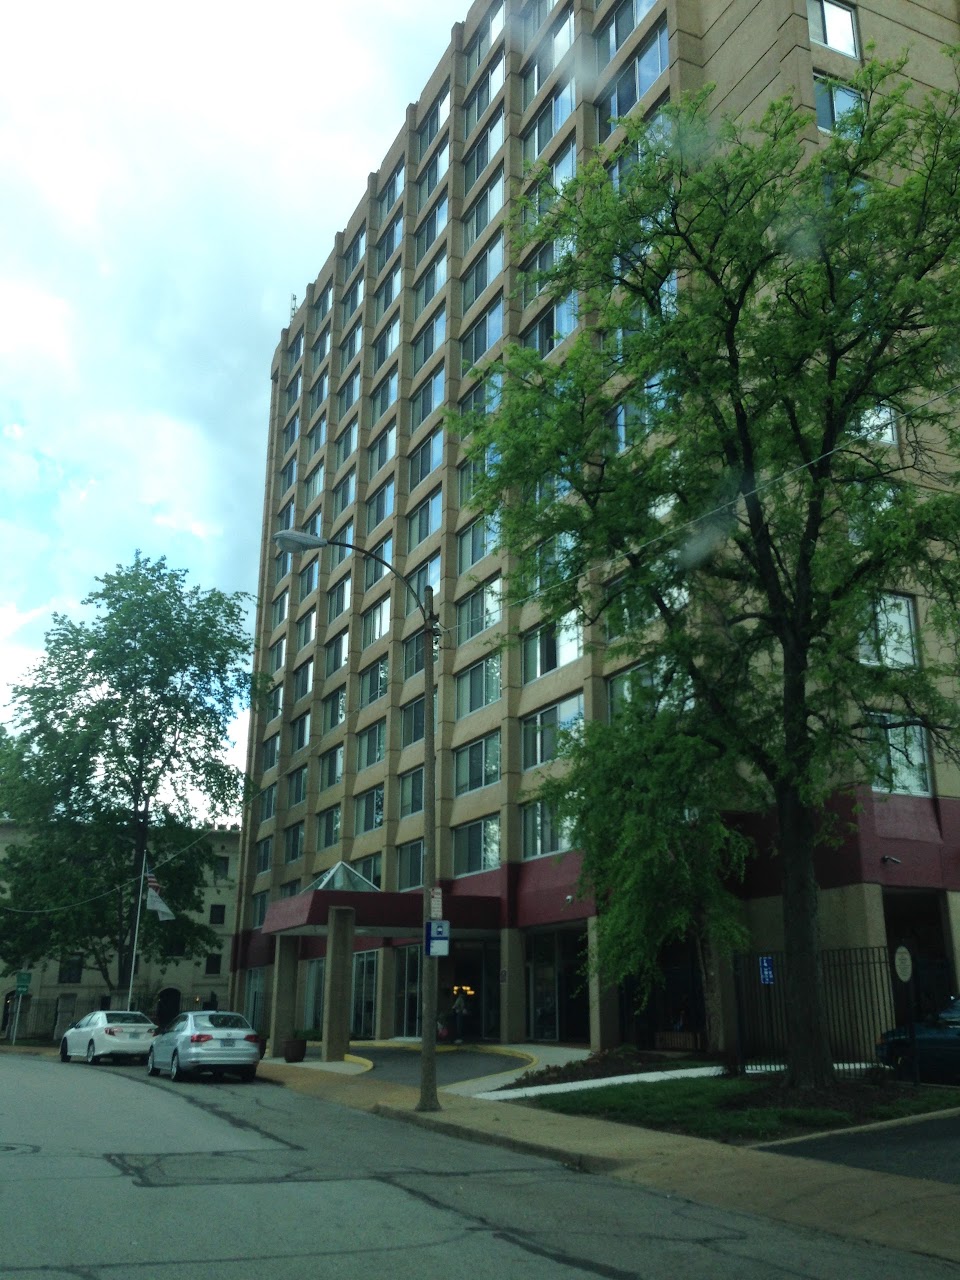 Photo of PARKVIEW PLACE at 701 WESTGATE AVE UNIVERSITY CITY, MO 63130